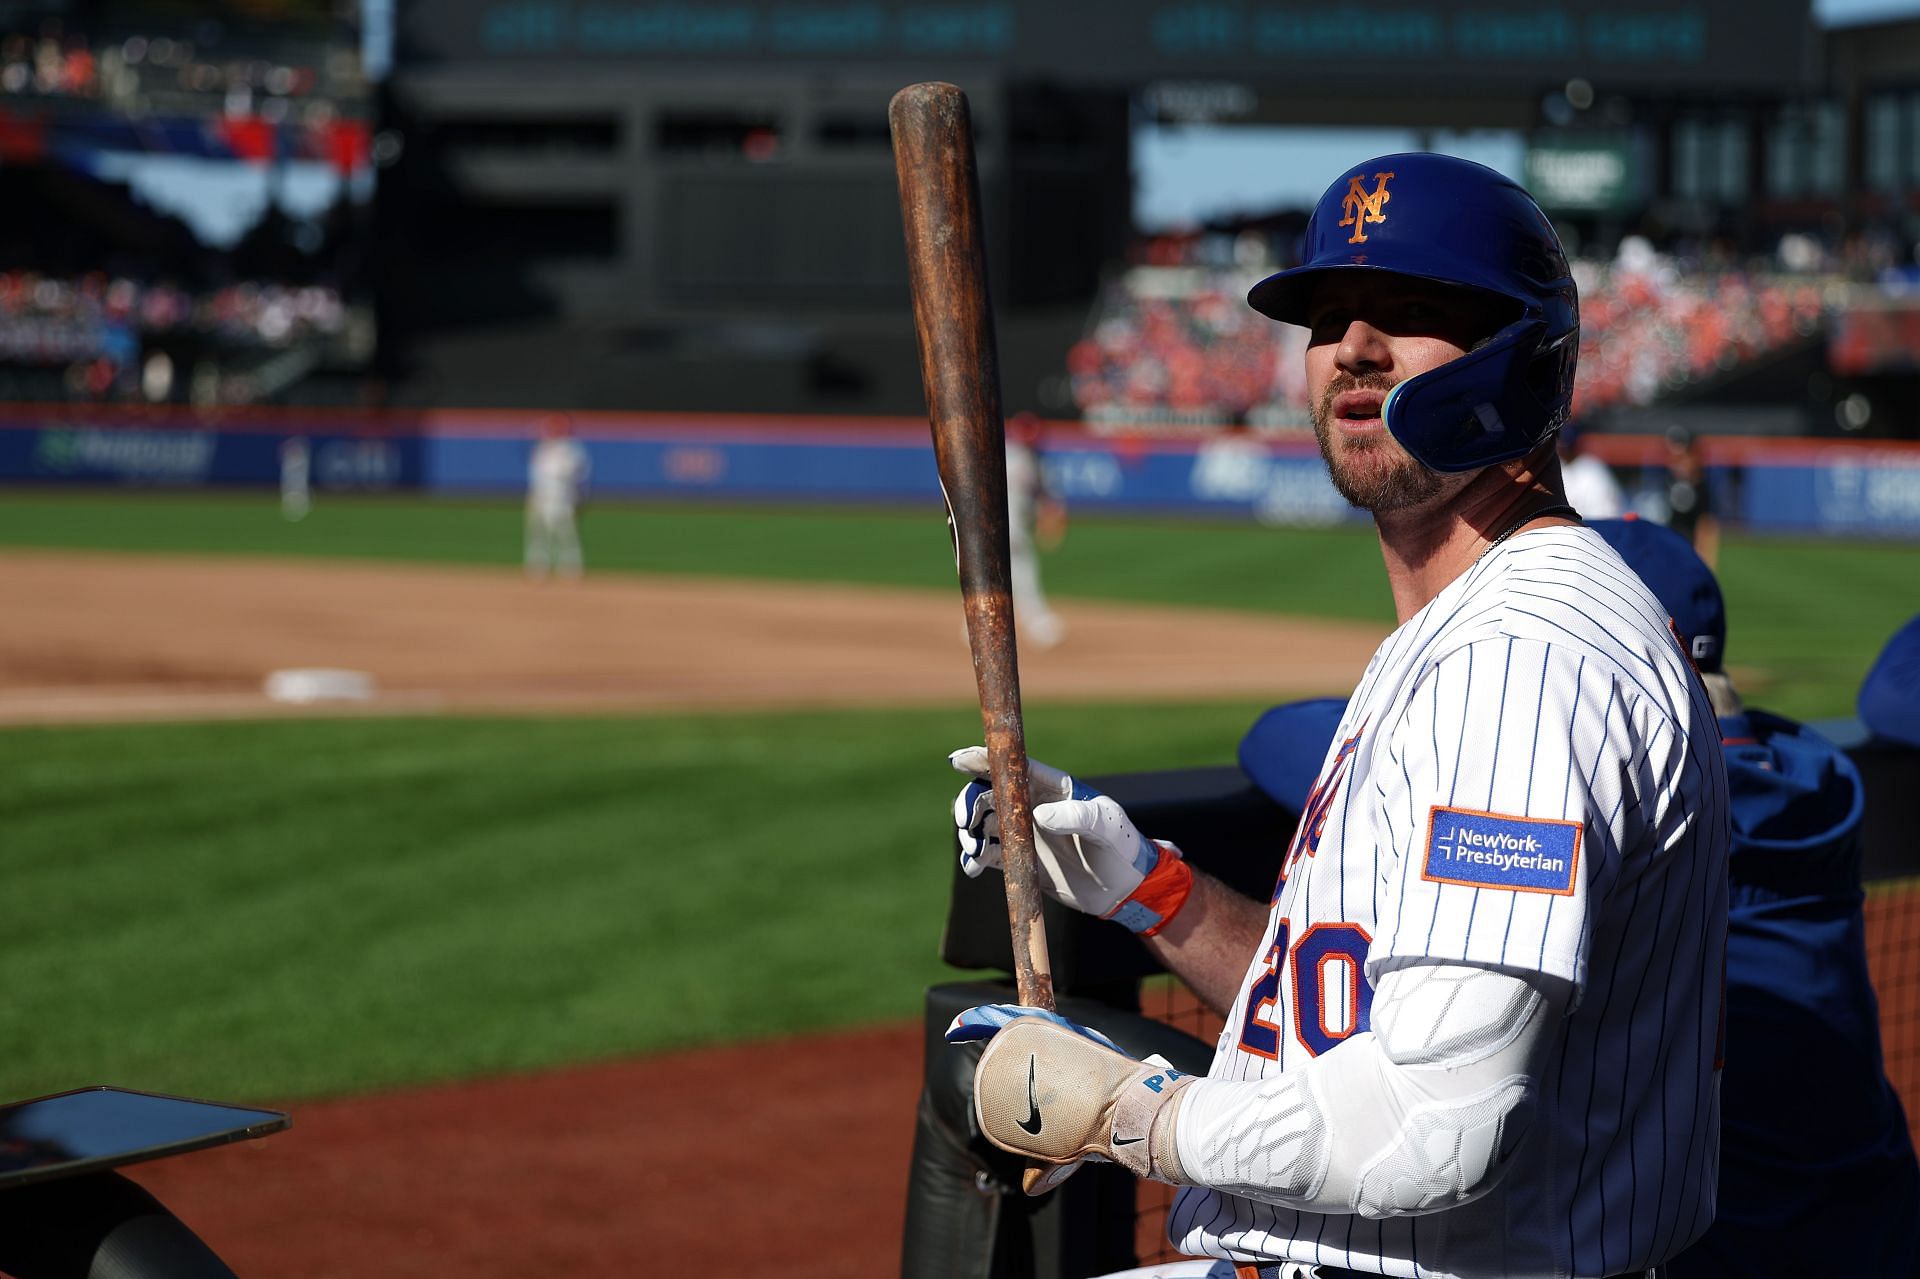 The Mets should extend Pete Alonso